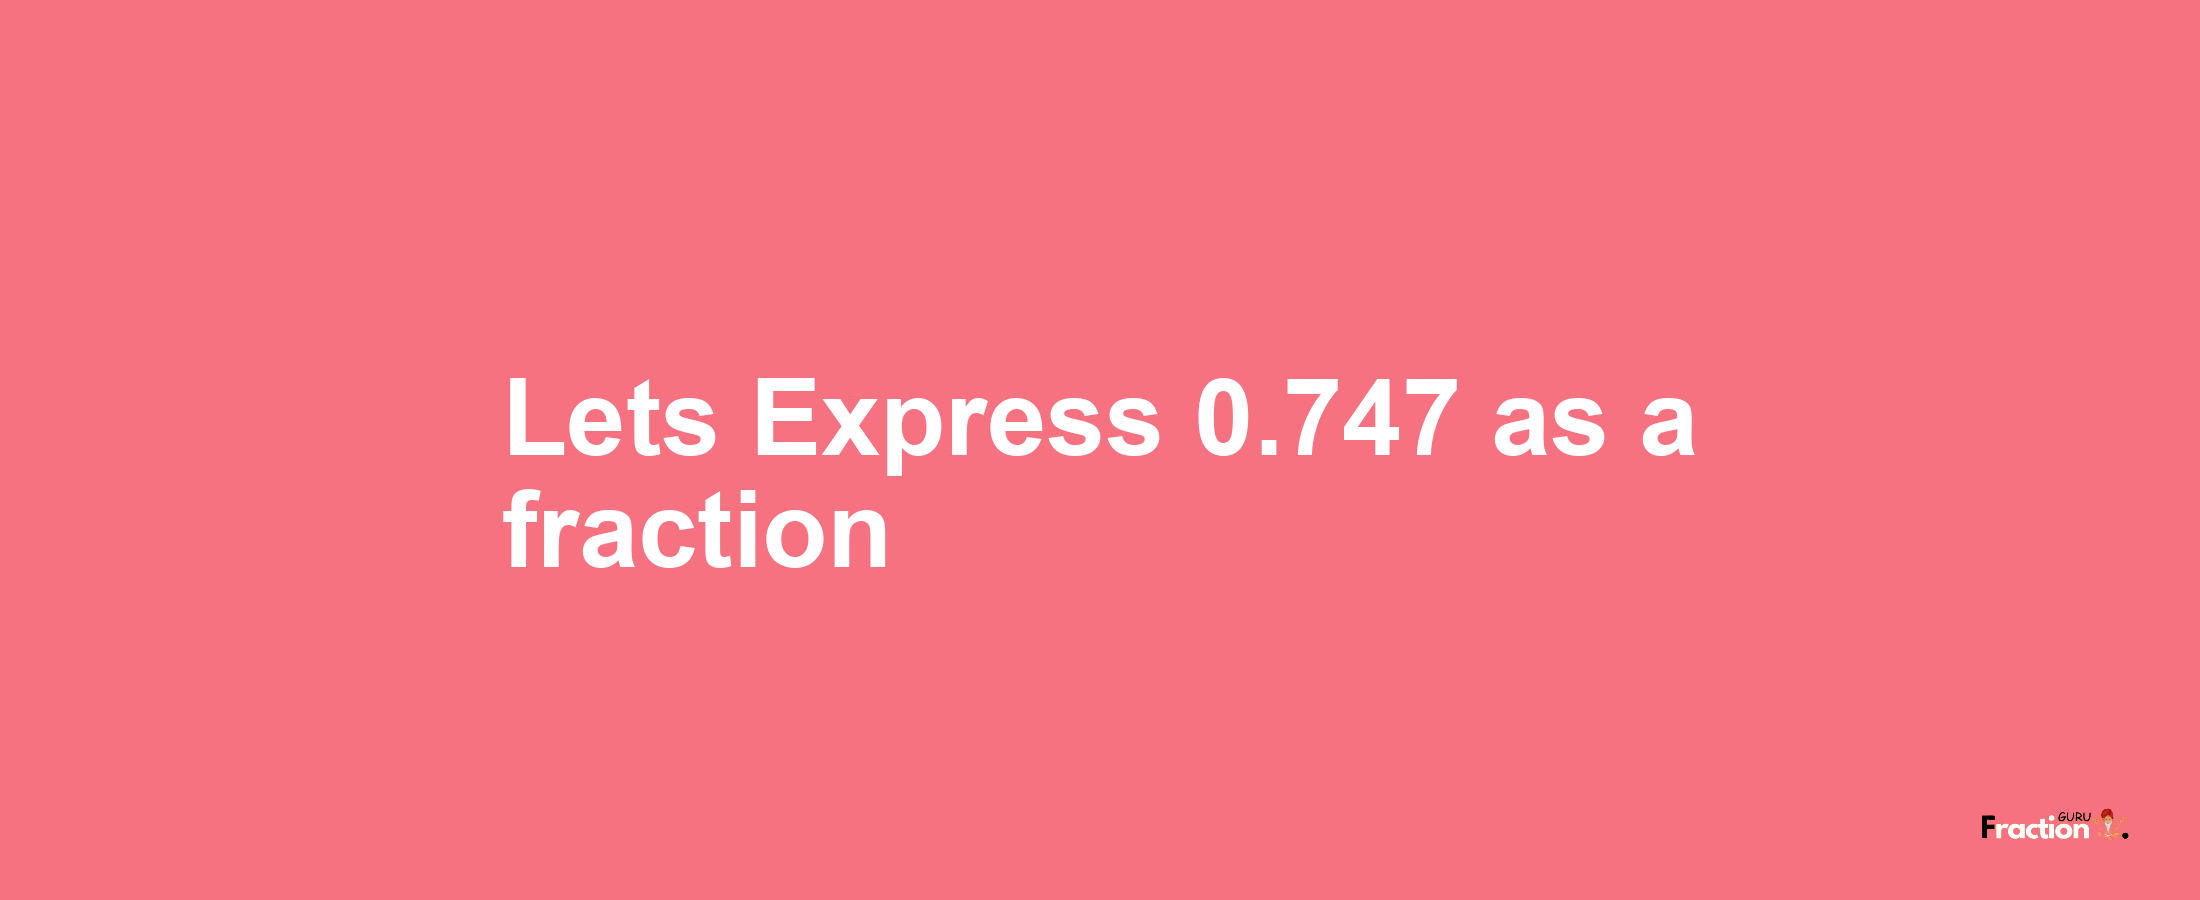 Lets Express 0.747 as afraction